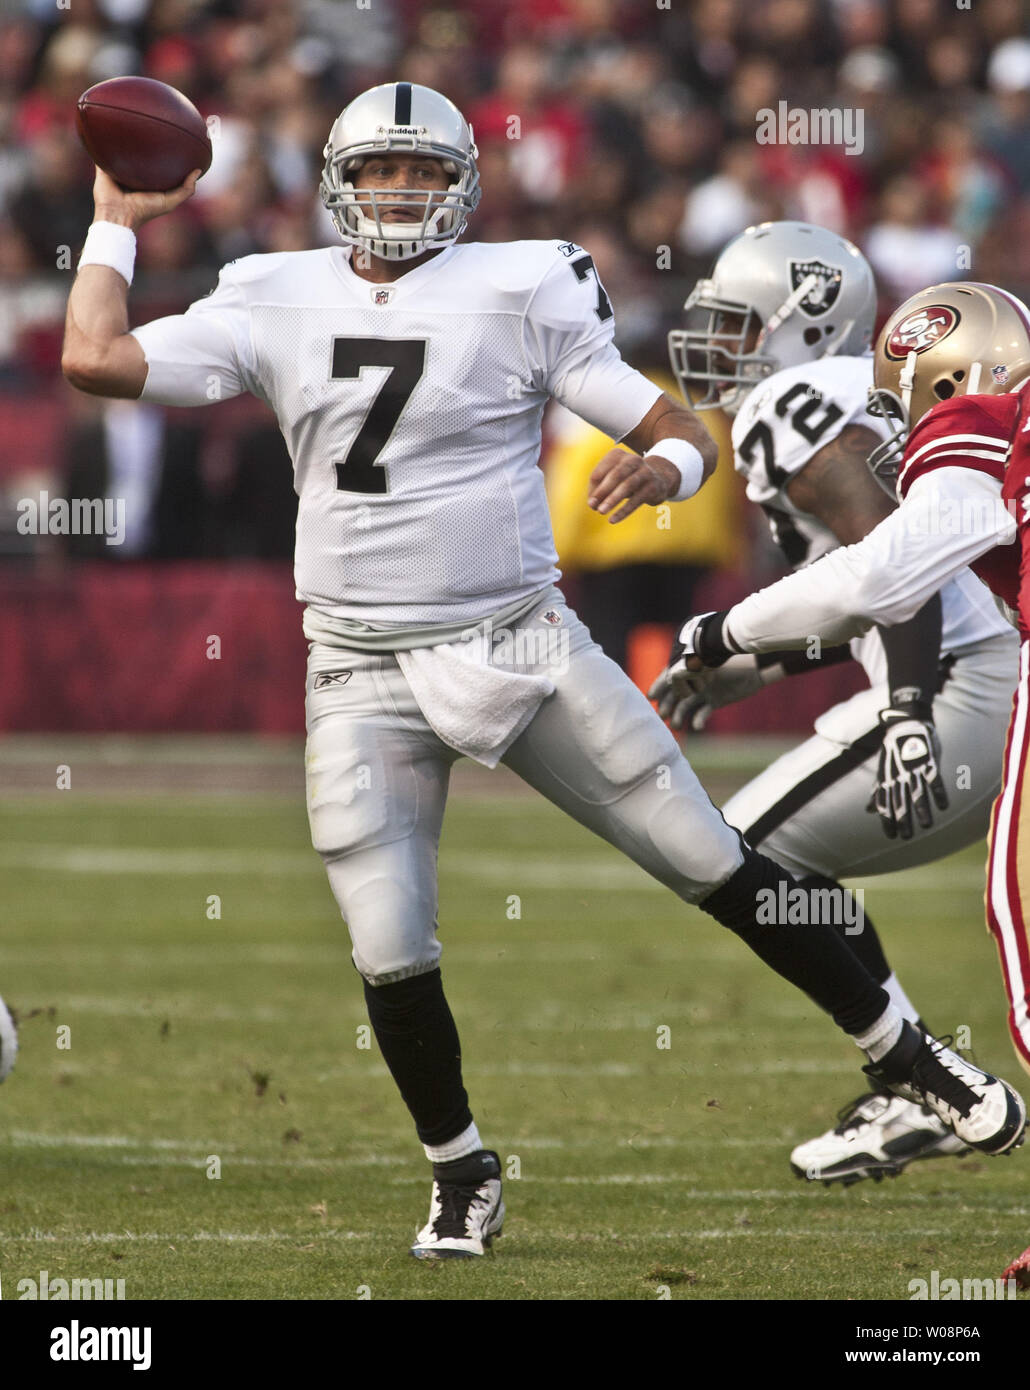 Oakland Raiders QB Kyle Boller (7) passes against the San Francisco 49ers at Candlestick Park in San Francisco on August 20, 2011.   UPI/Terry Schmitt Stock Photo